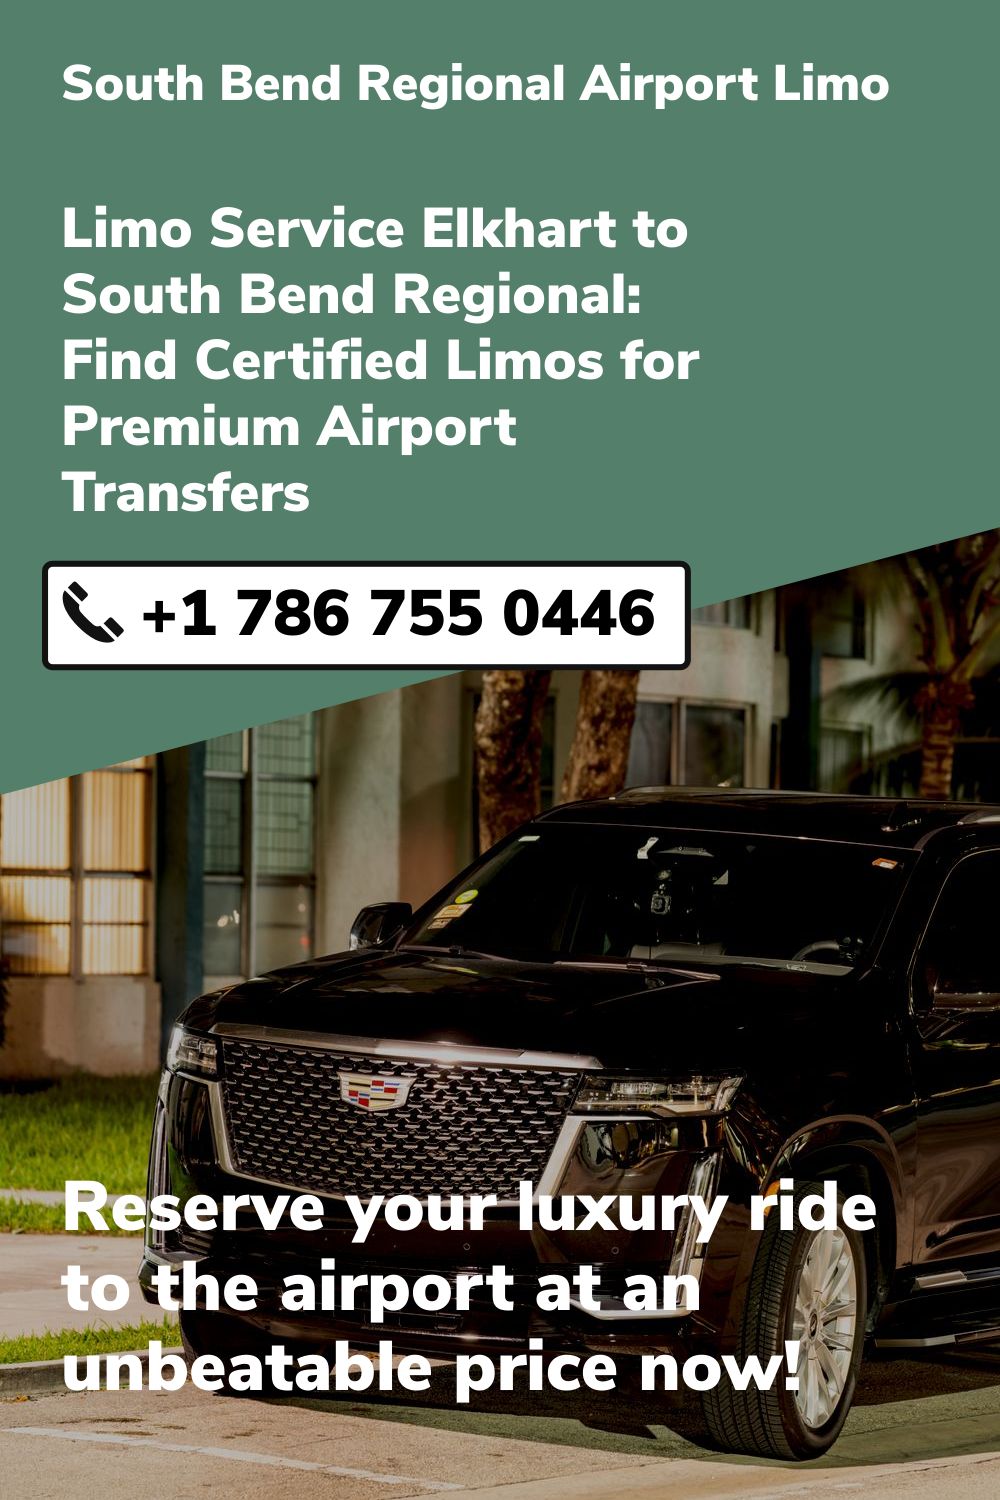 South Bend Regional Airport Limo